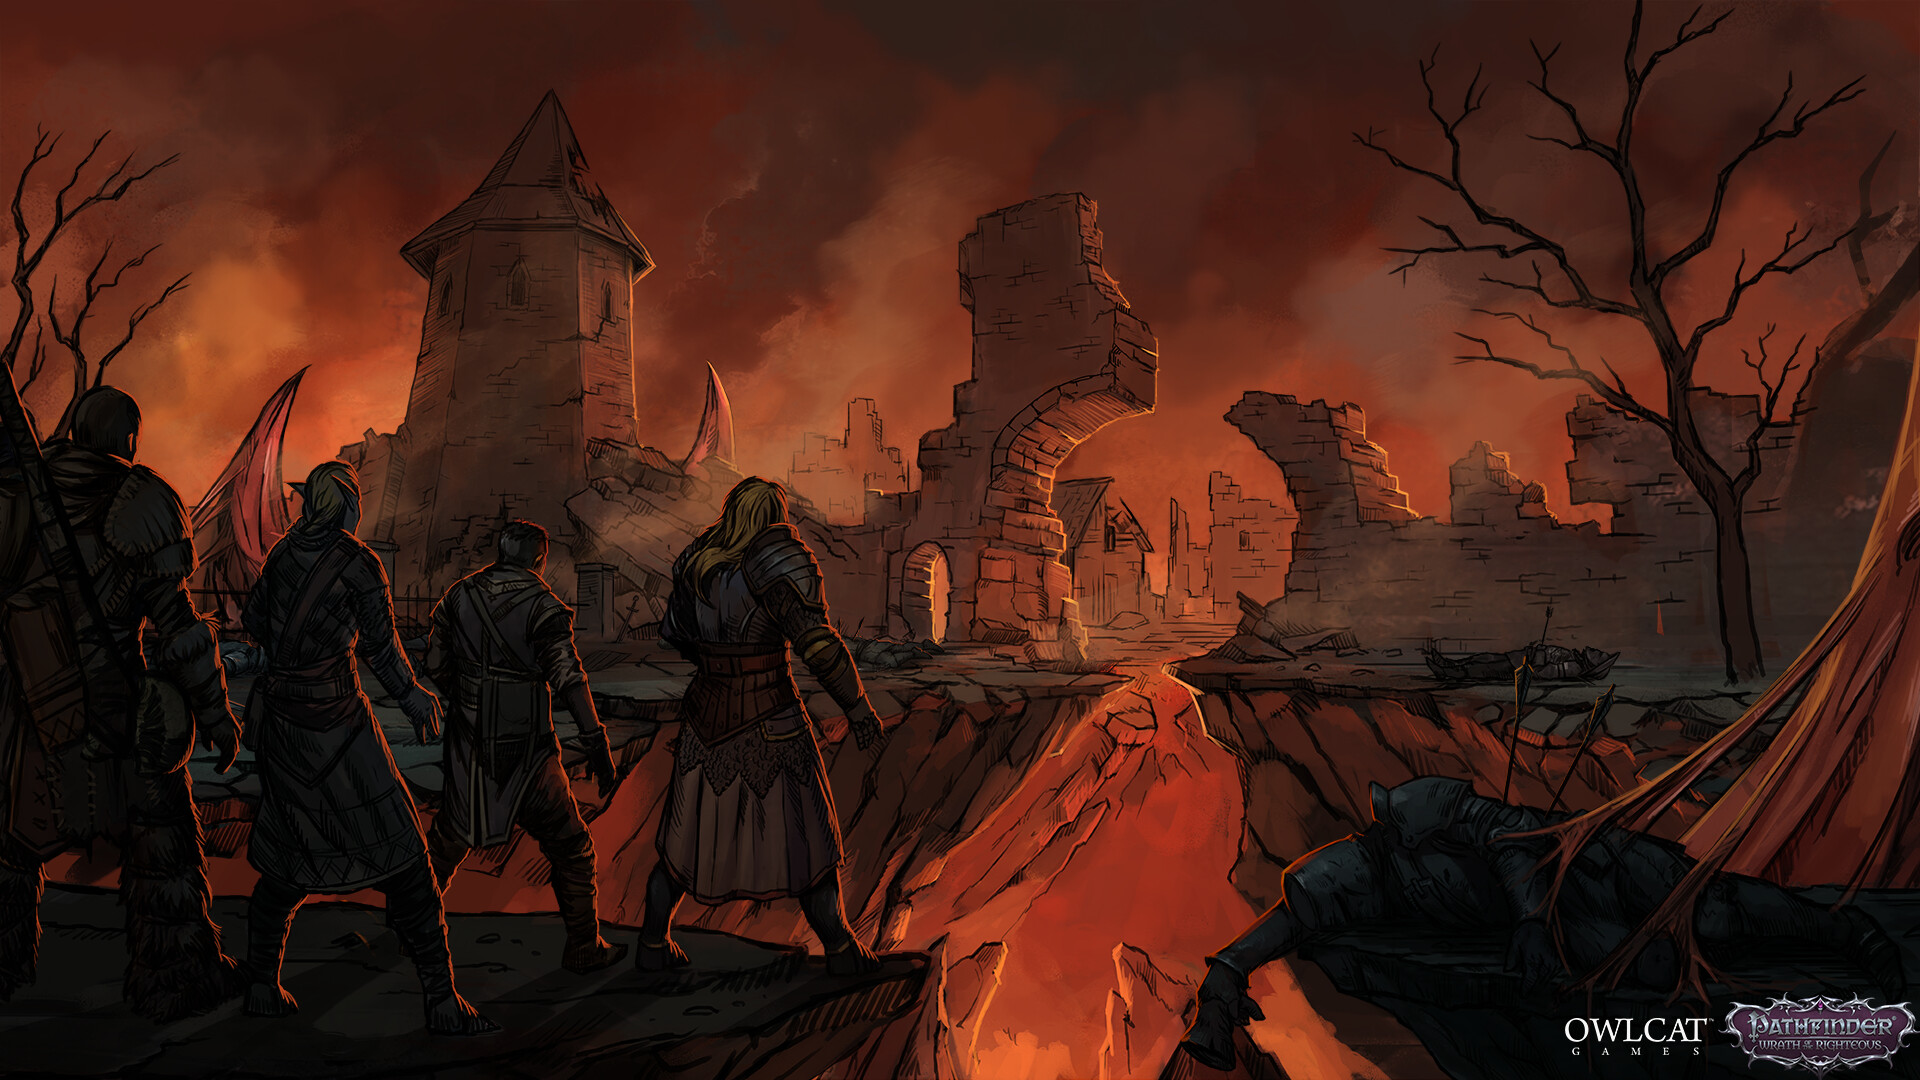 HD desktop wallpaper featuring a scene from Pathfinder: Wrath of the Righteous, with characters overlooking a fiery, war-torn landscape.